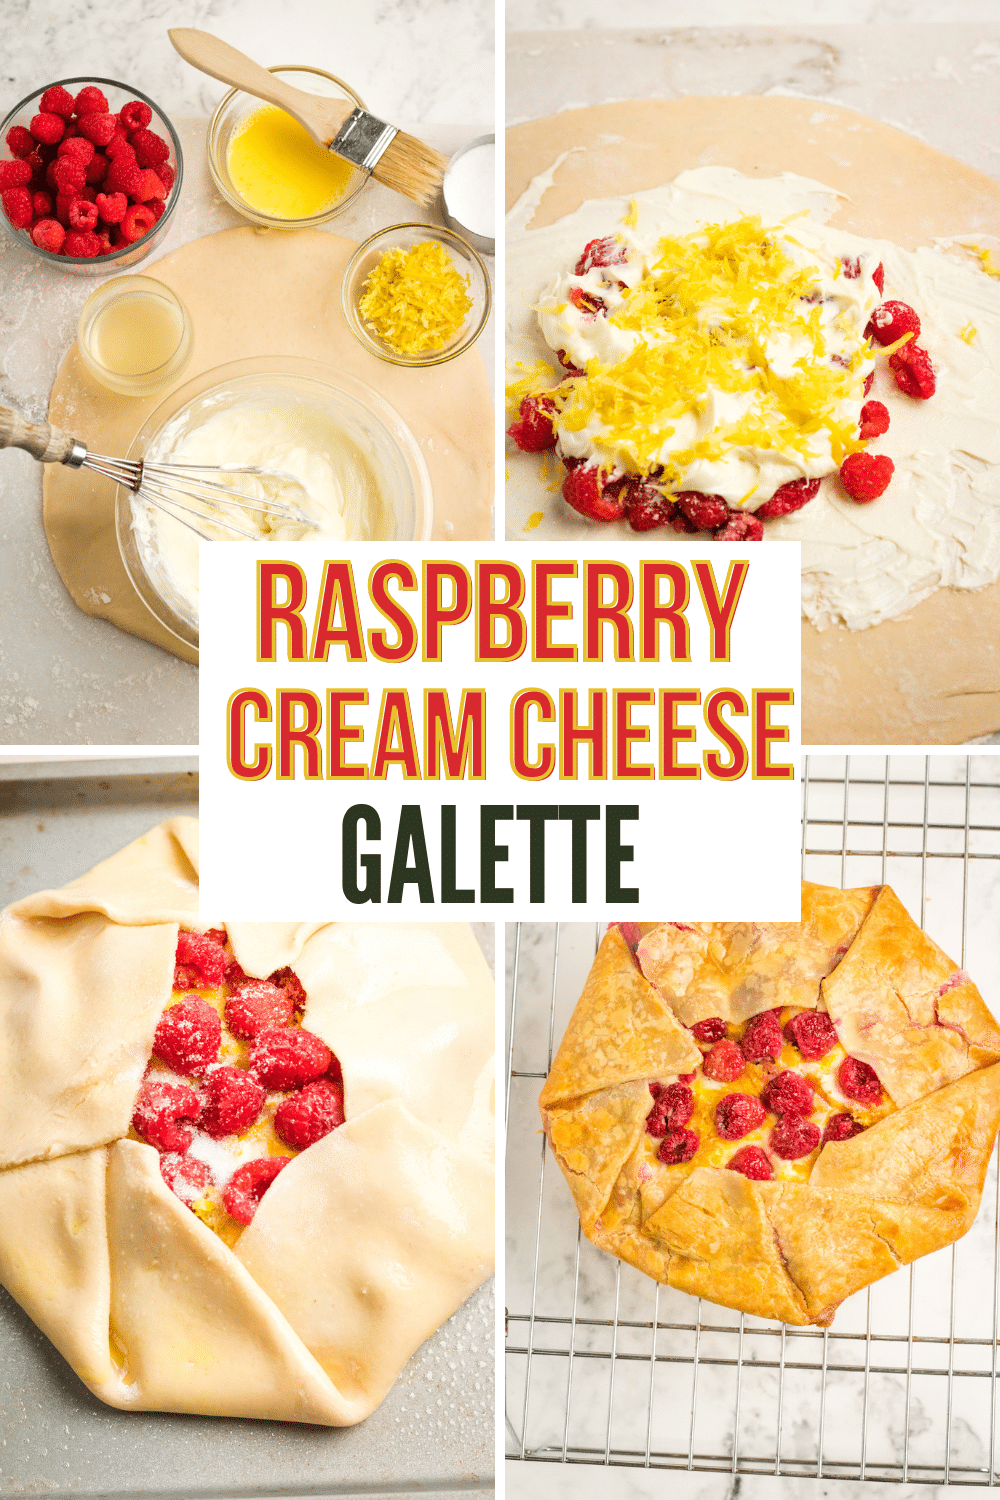 This raspberry cream cheese galette is everything you love about pie, without the fuss. This is a dessert that’s sure to impress. #raspberry #creamcheese #galette #dessert #recipe via @wondermomwannab